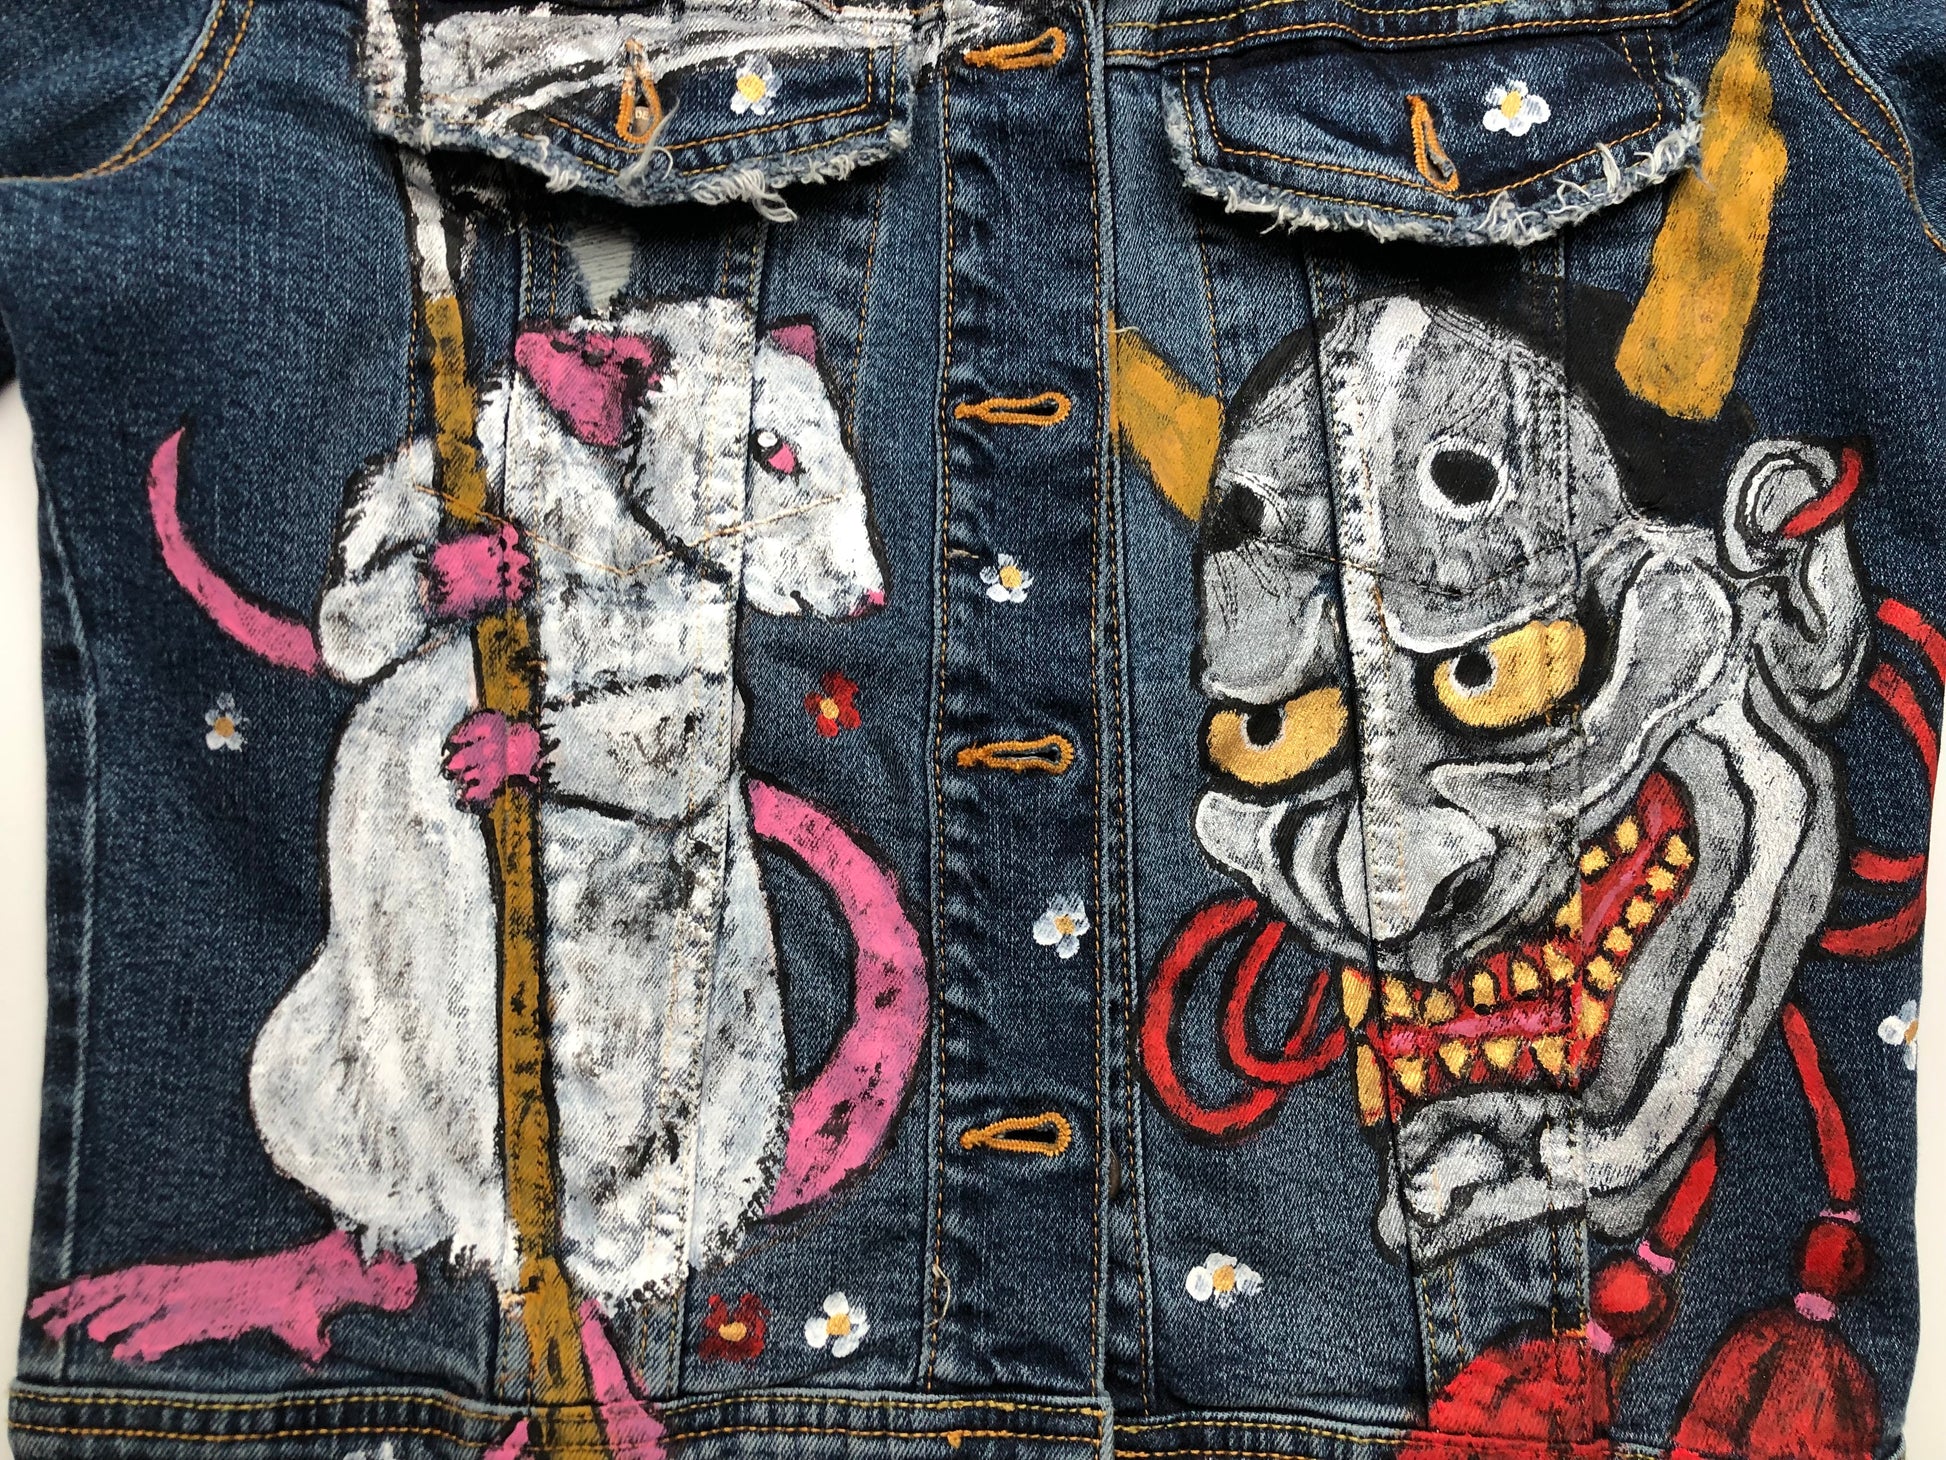 Detail drawing on a women's denim jacket front side